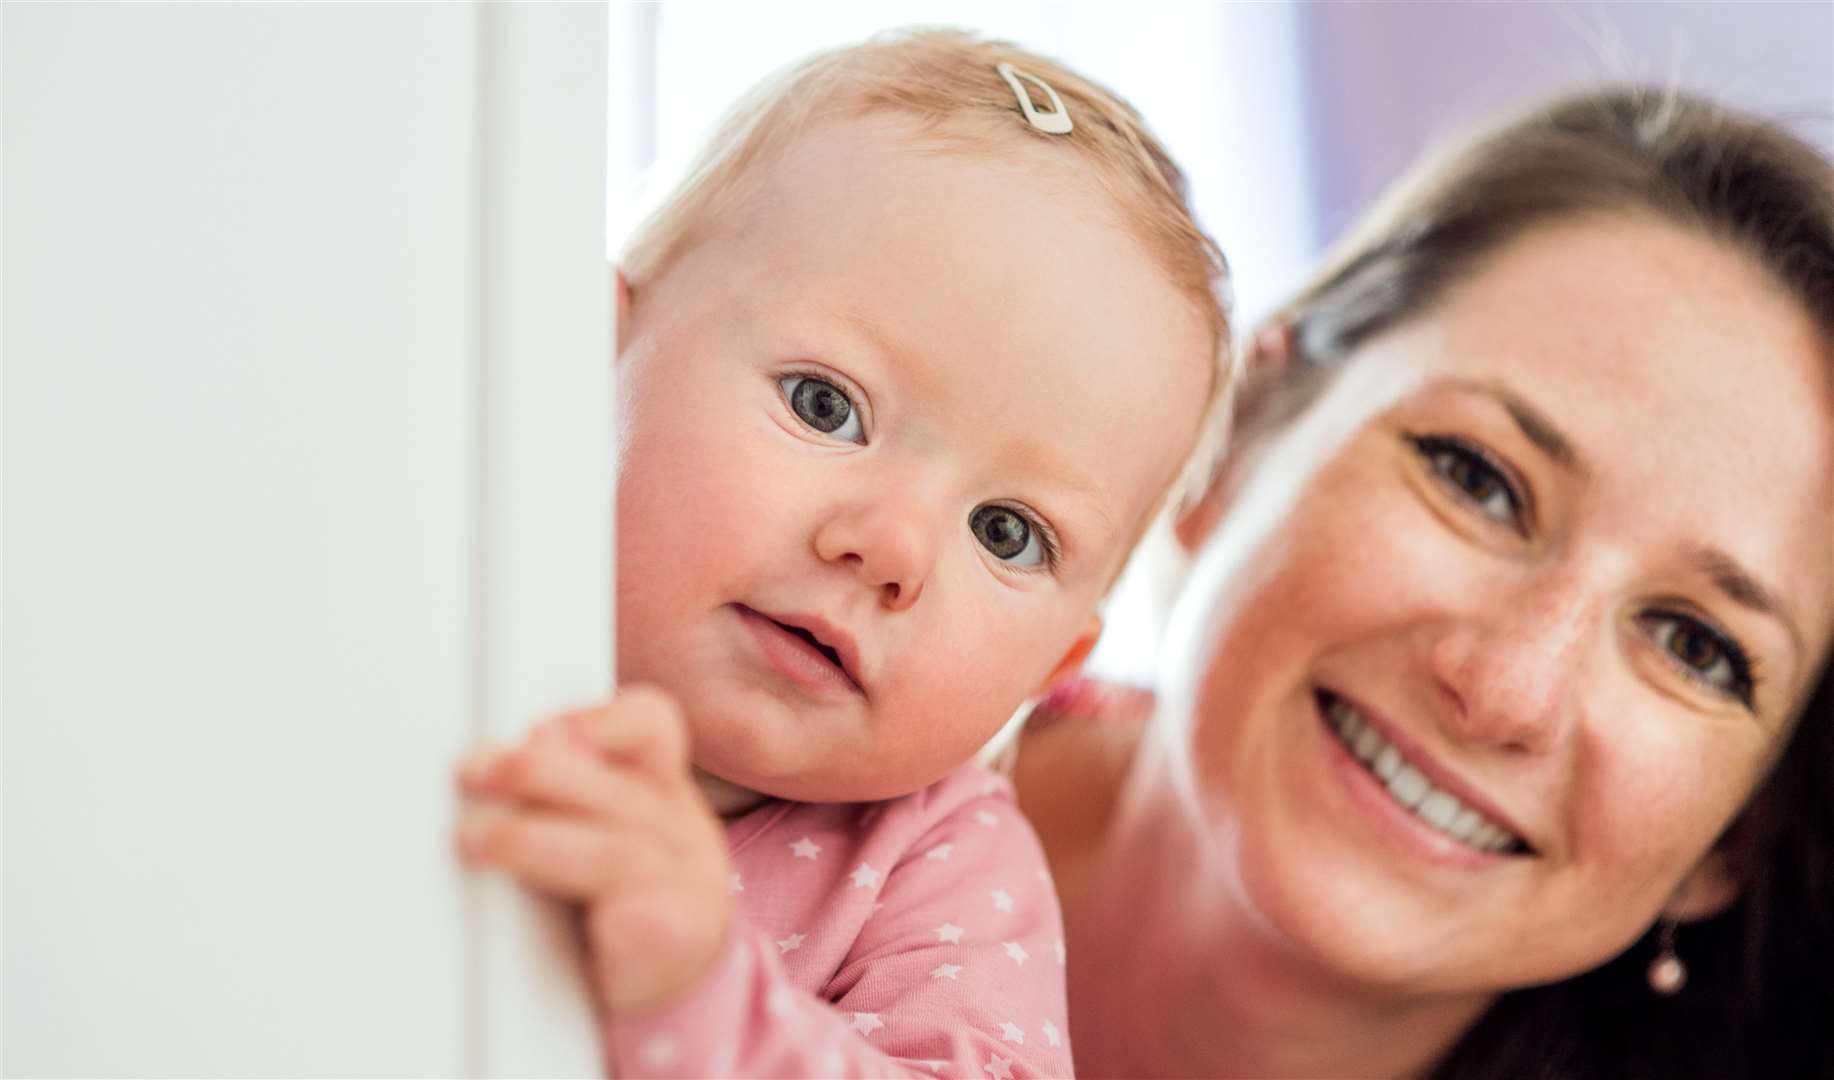 Fostering is caring for a child in your own home when they are unable to live with their birth family.